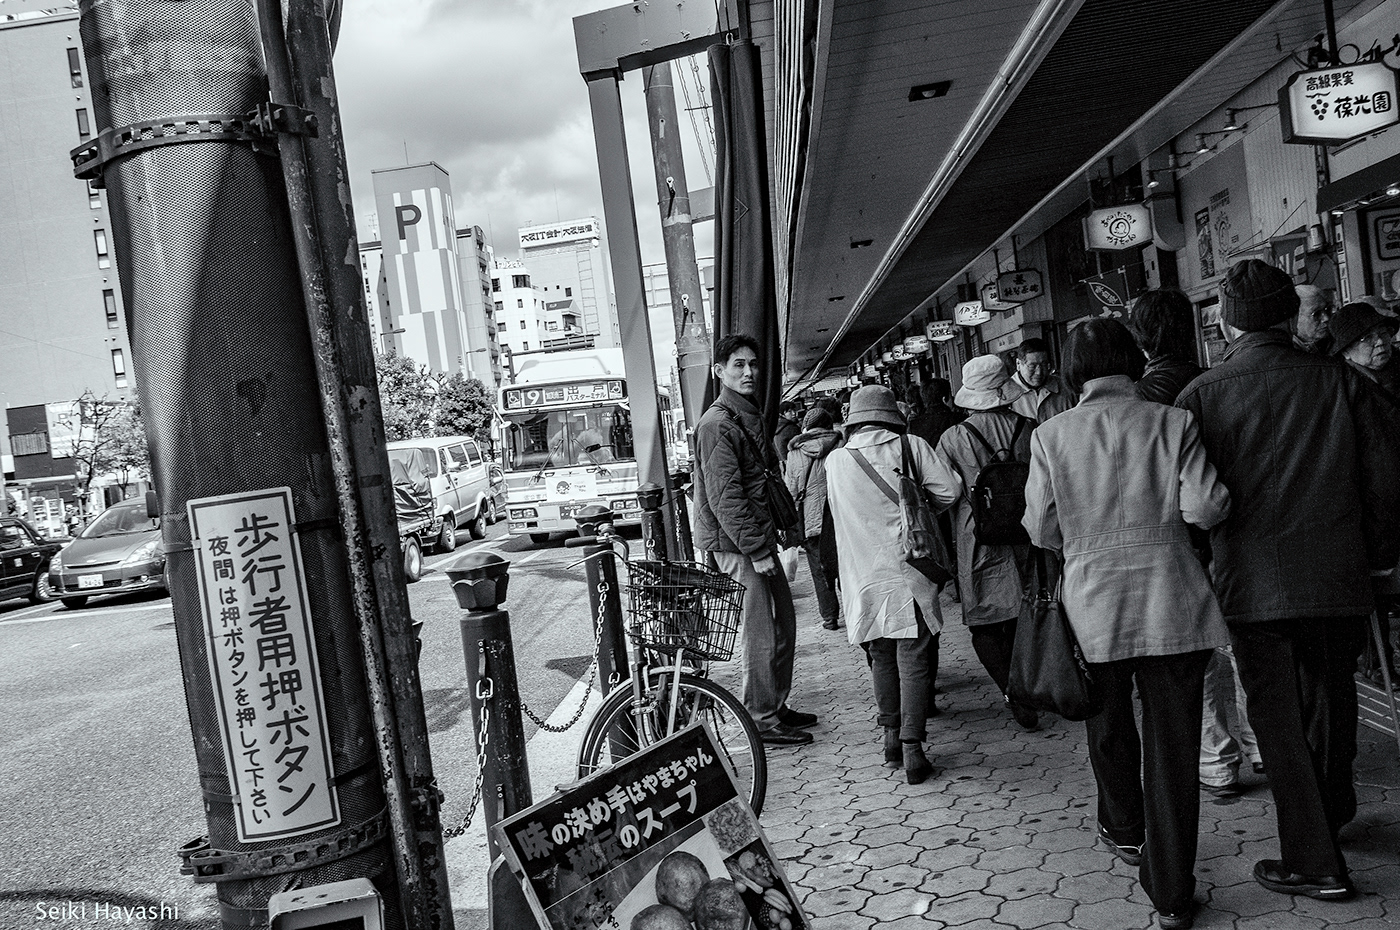 Street streetphotography black and whie city monochrome japan